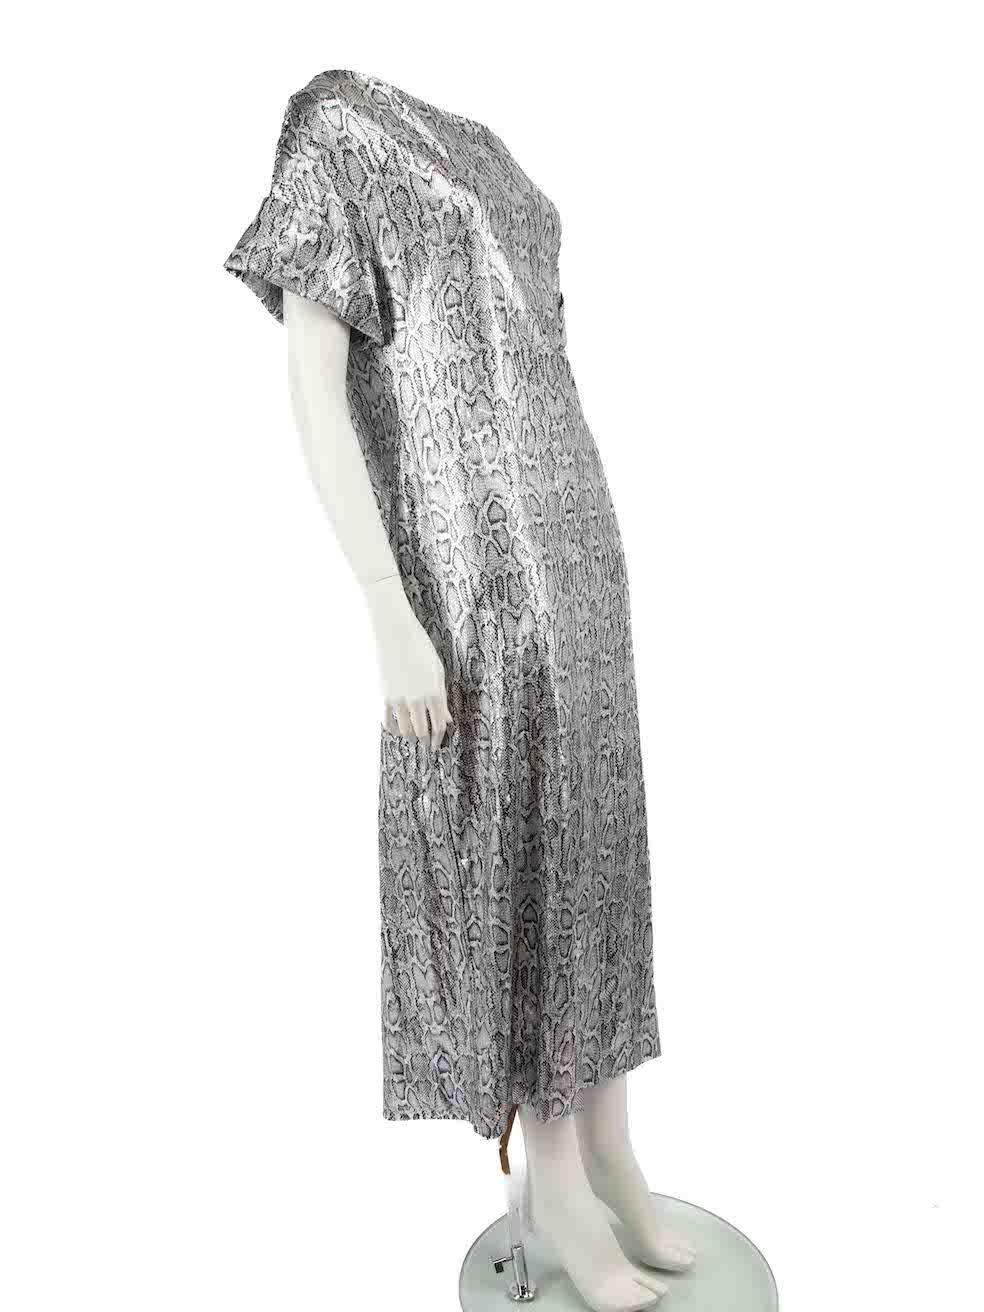 CONDITION is Never worn, with tags. No visible wear to dress is evident on this new Christopher Kane designer resale item.
 
 
 
 Details
 
 
 Silver
 
 Synthetic
 
 Midi dress
 
 Off the shoulder
 
 Snakeskin print pattern
 
 Sequinned detail
 
